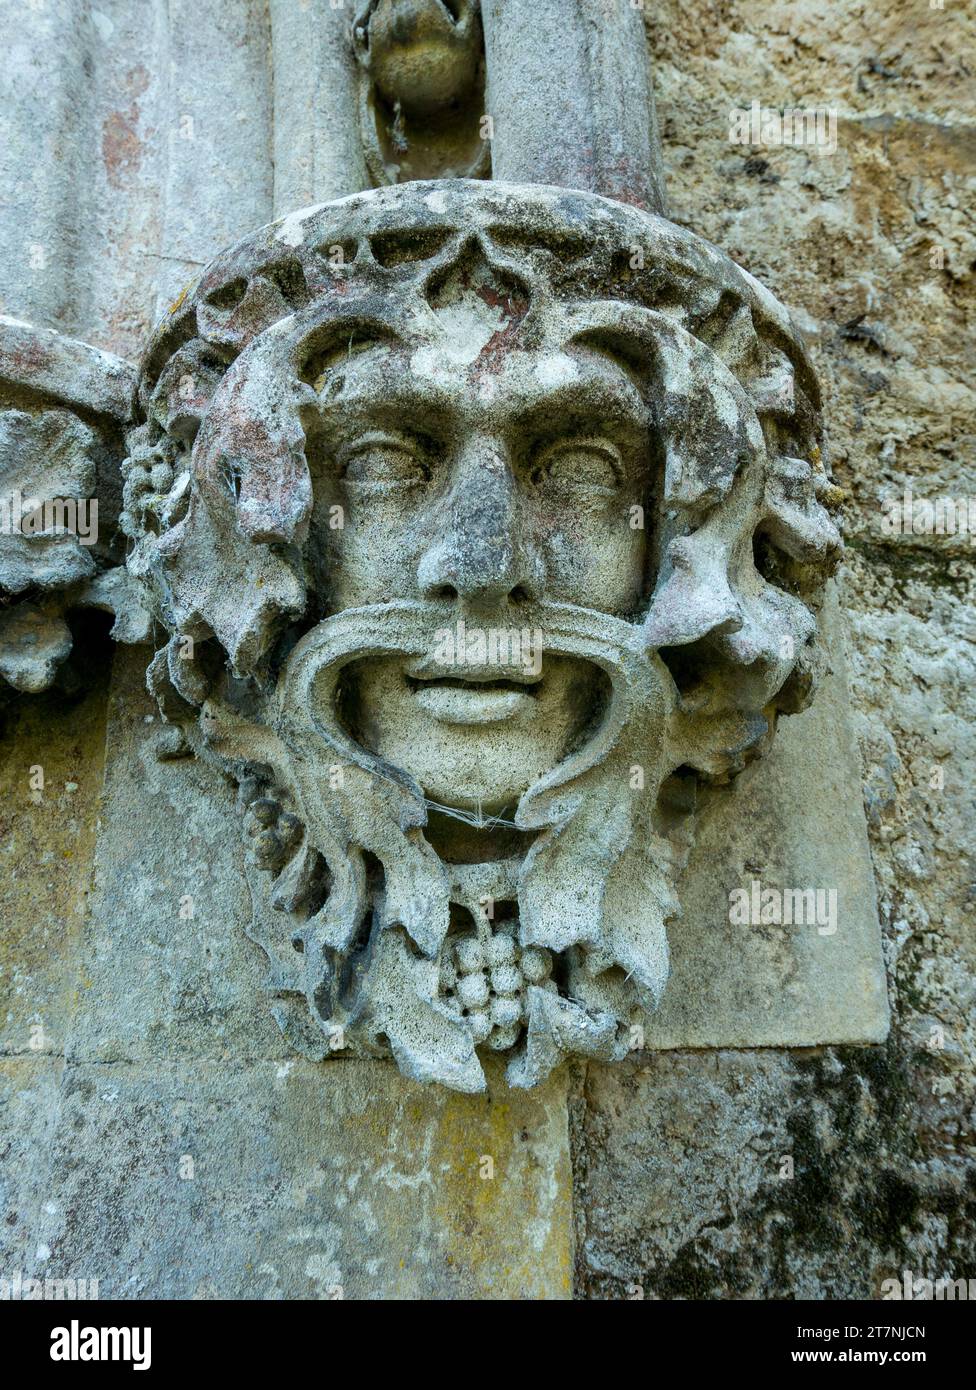 Detail view of decorative stone carving / stone masonry grotesque green man face caricature Little Dalby Church, Leicestershire, England, UK Stock Photo